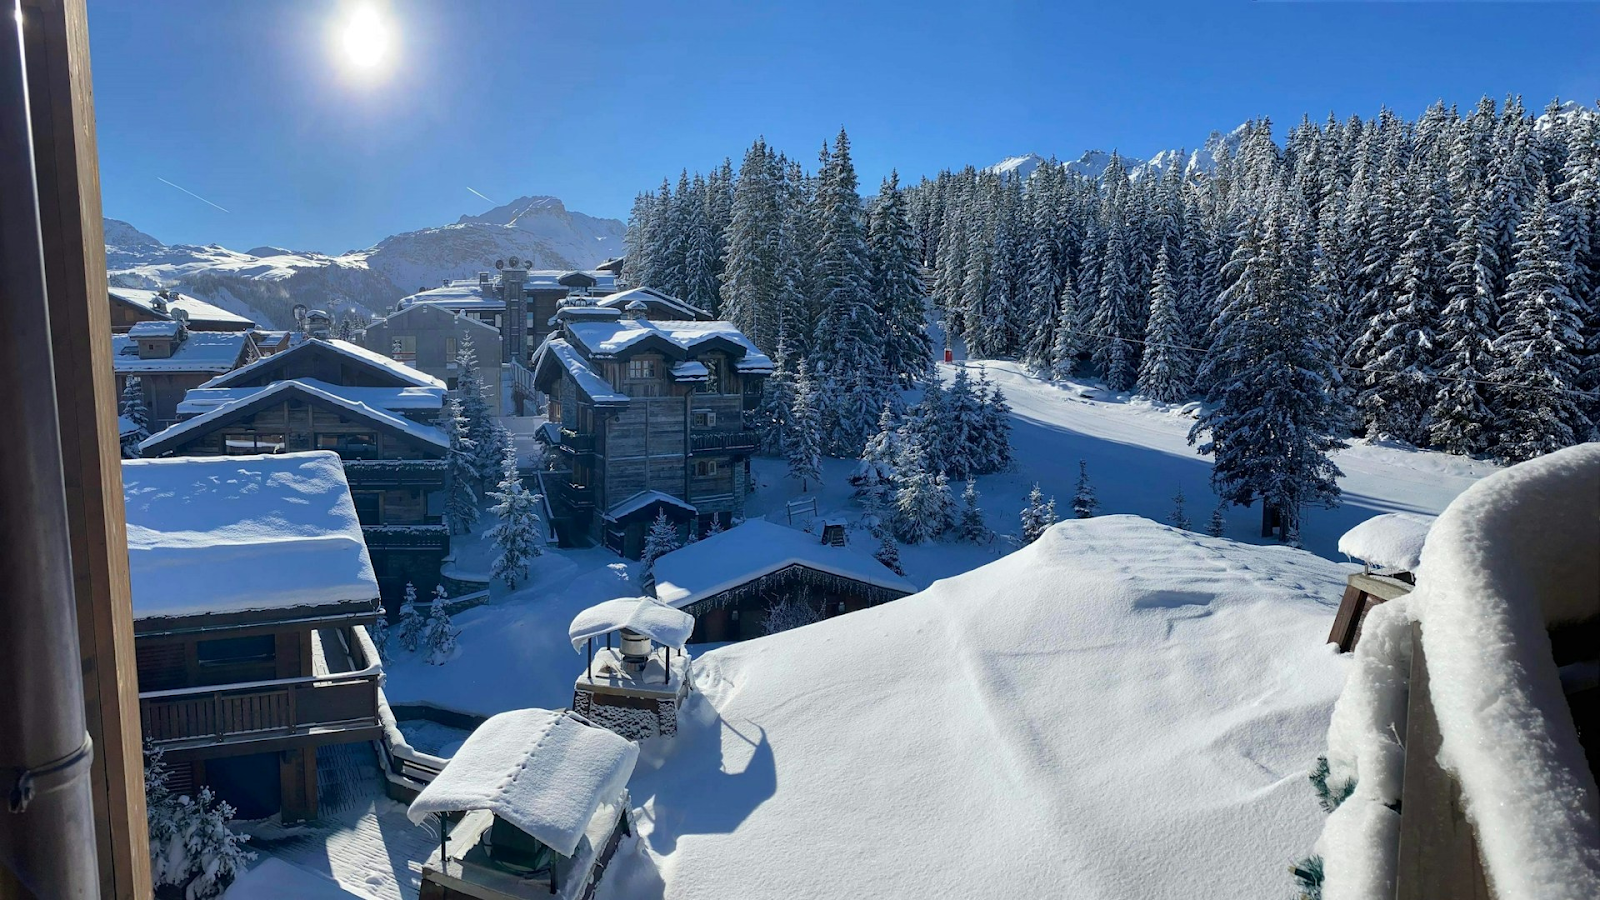 Courchevel in the snow